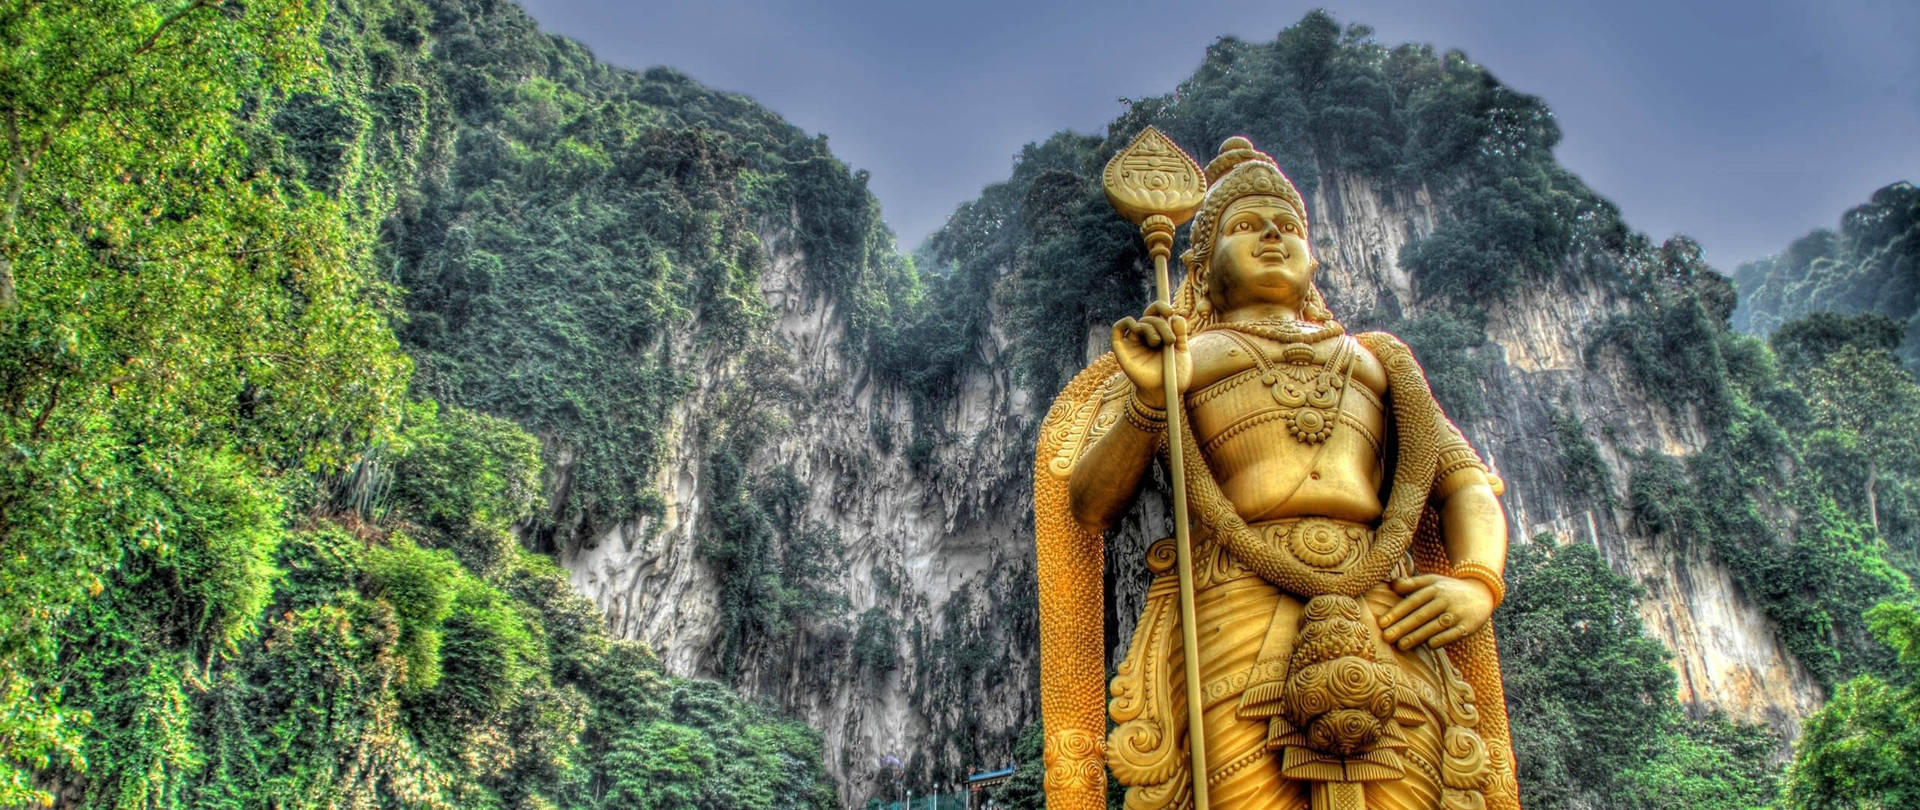 Murugan Statue By The Mountains Background